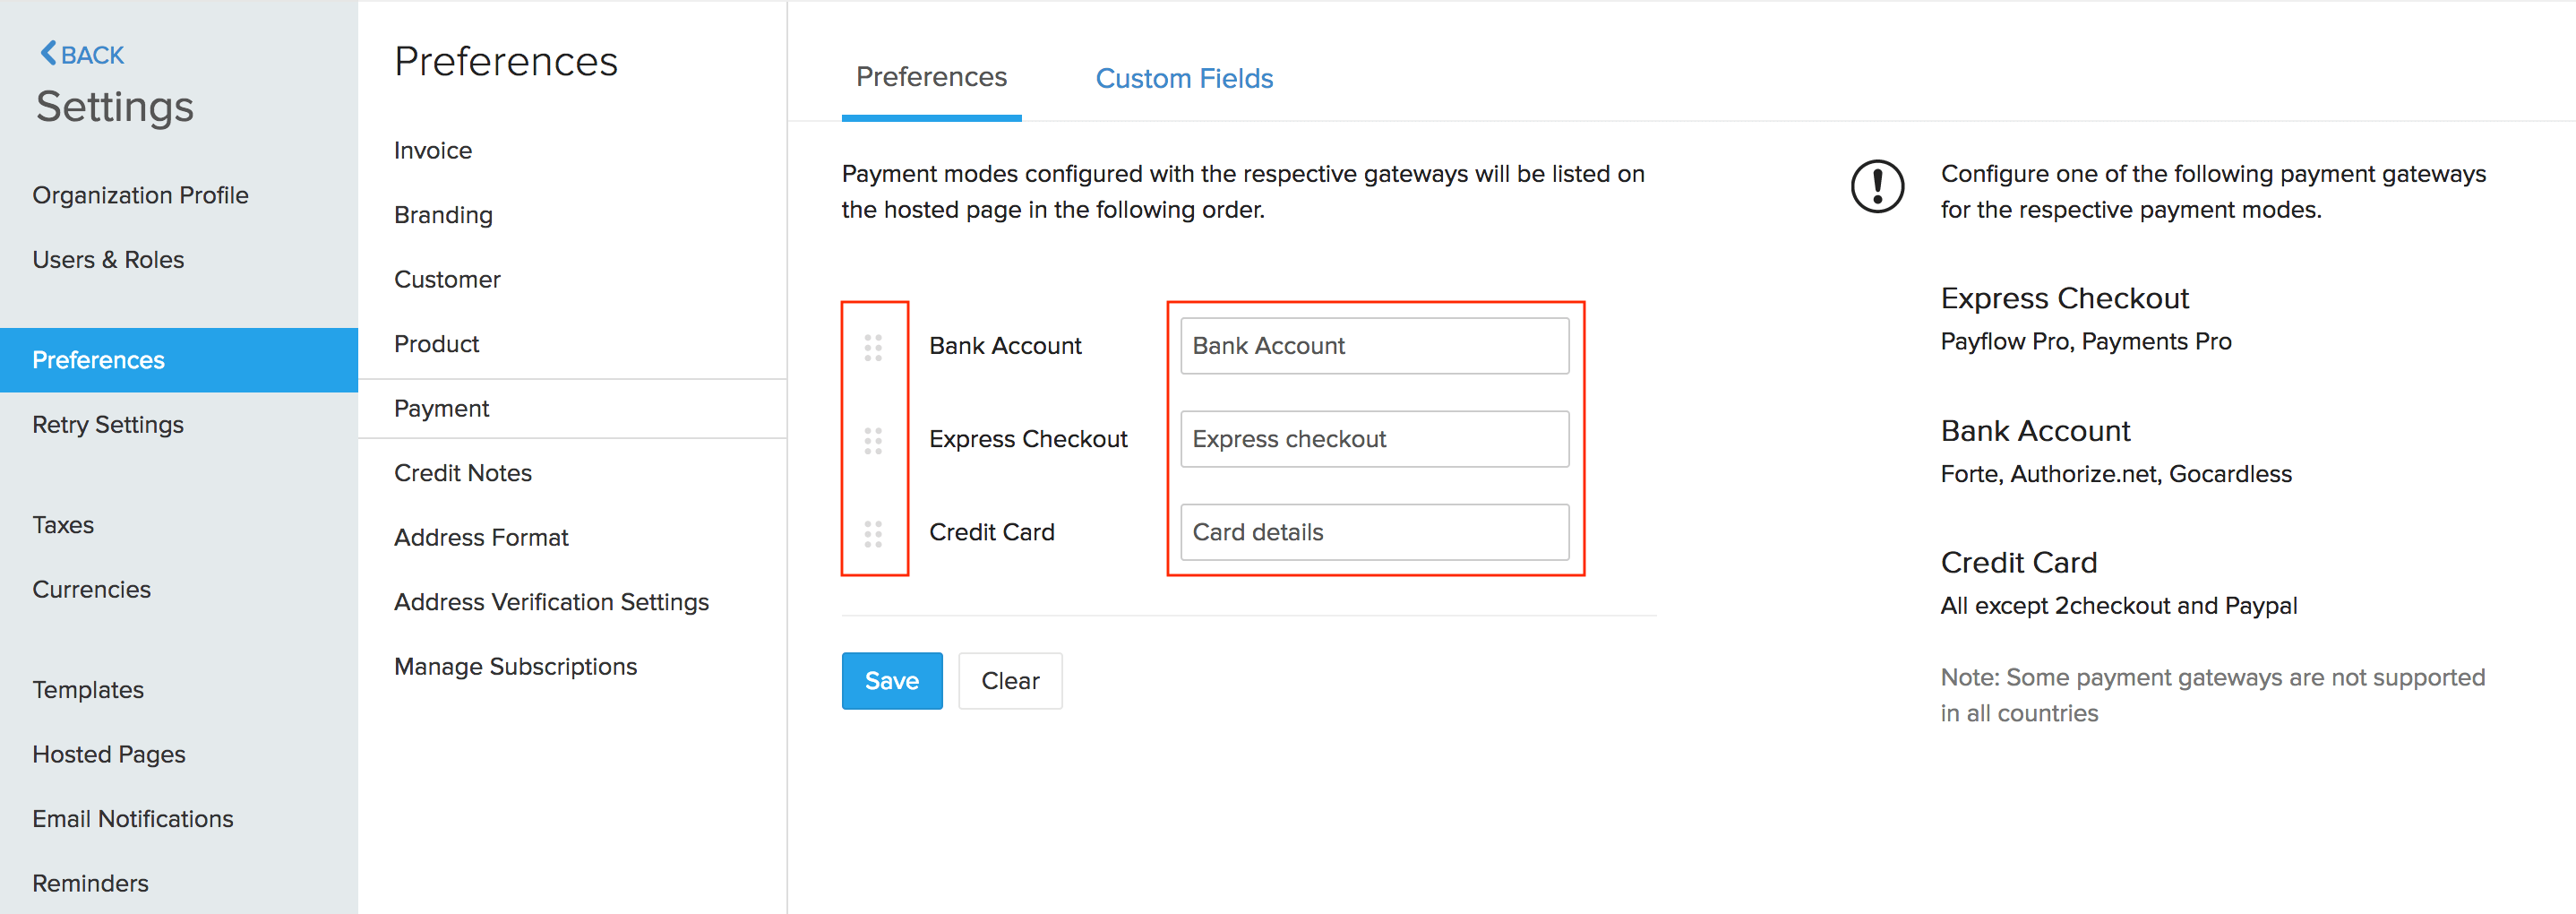 Payment Mode Preferences